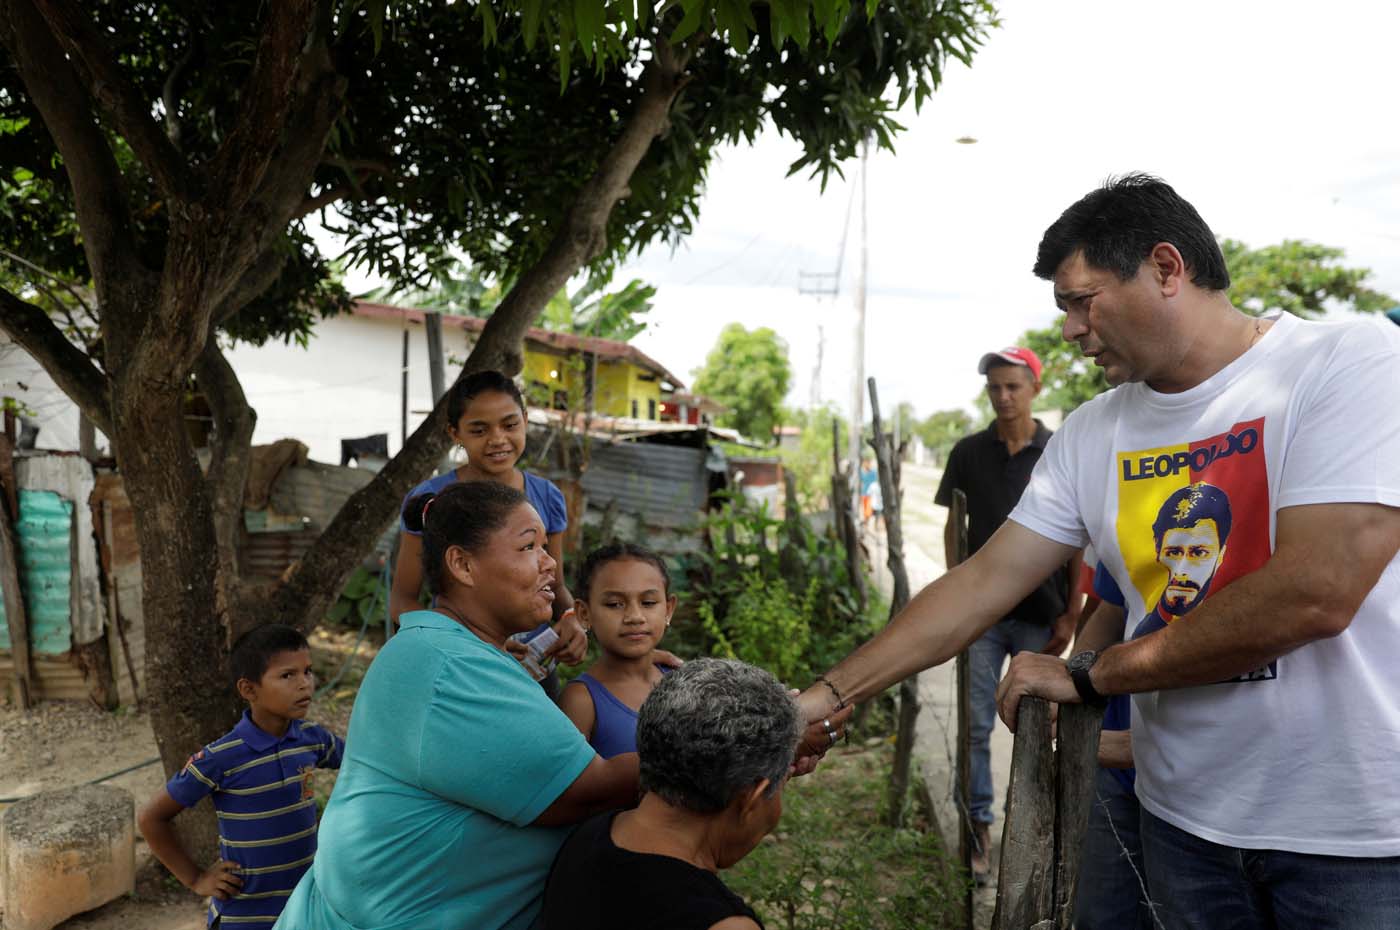 The opposition Democratic Unity coalition candidate for Barinas state Freddy Superlano (C) talks with residents of a slum while campaigning on the outskirts of Barinas, Venezuela, October 3, 2017. Picture taken on October 3, 2017. REUTERS/Ricardo Moraes